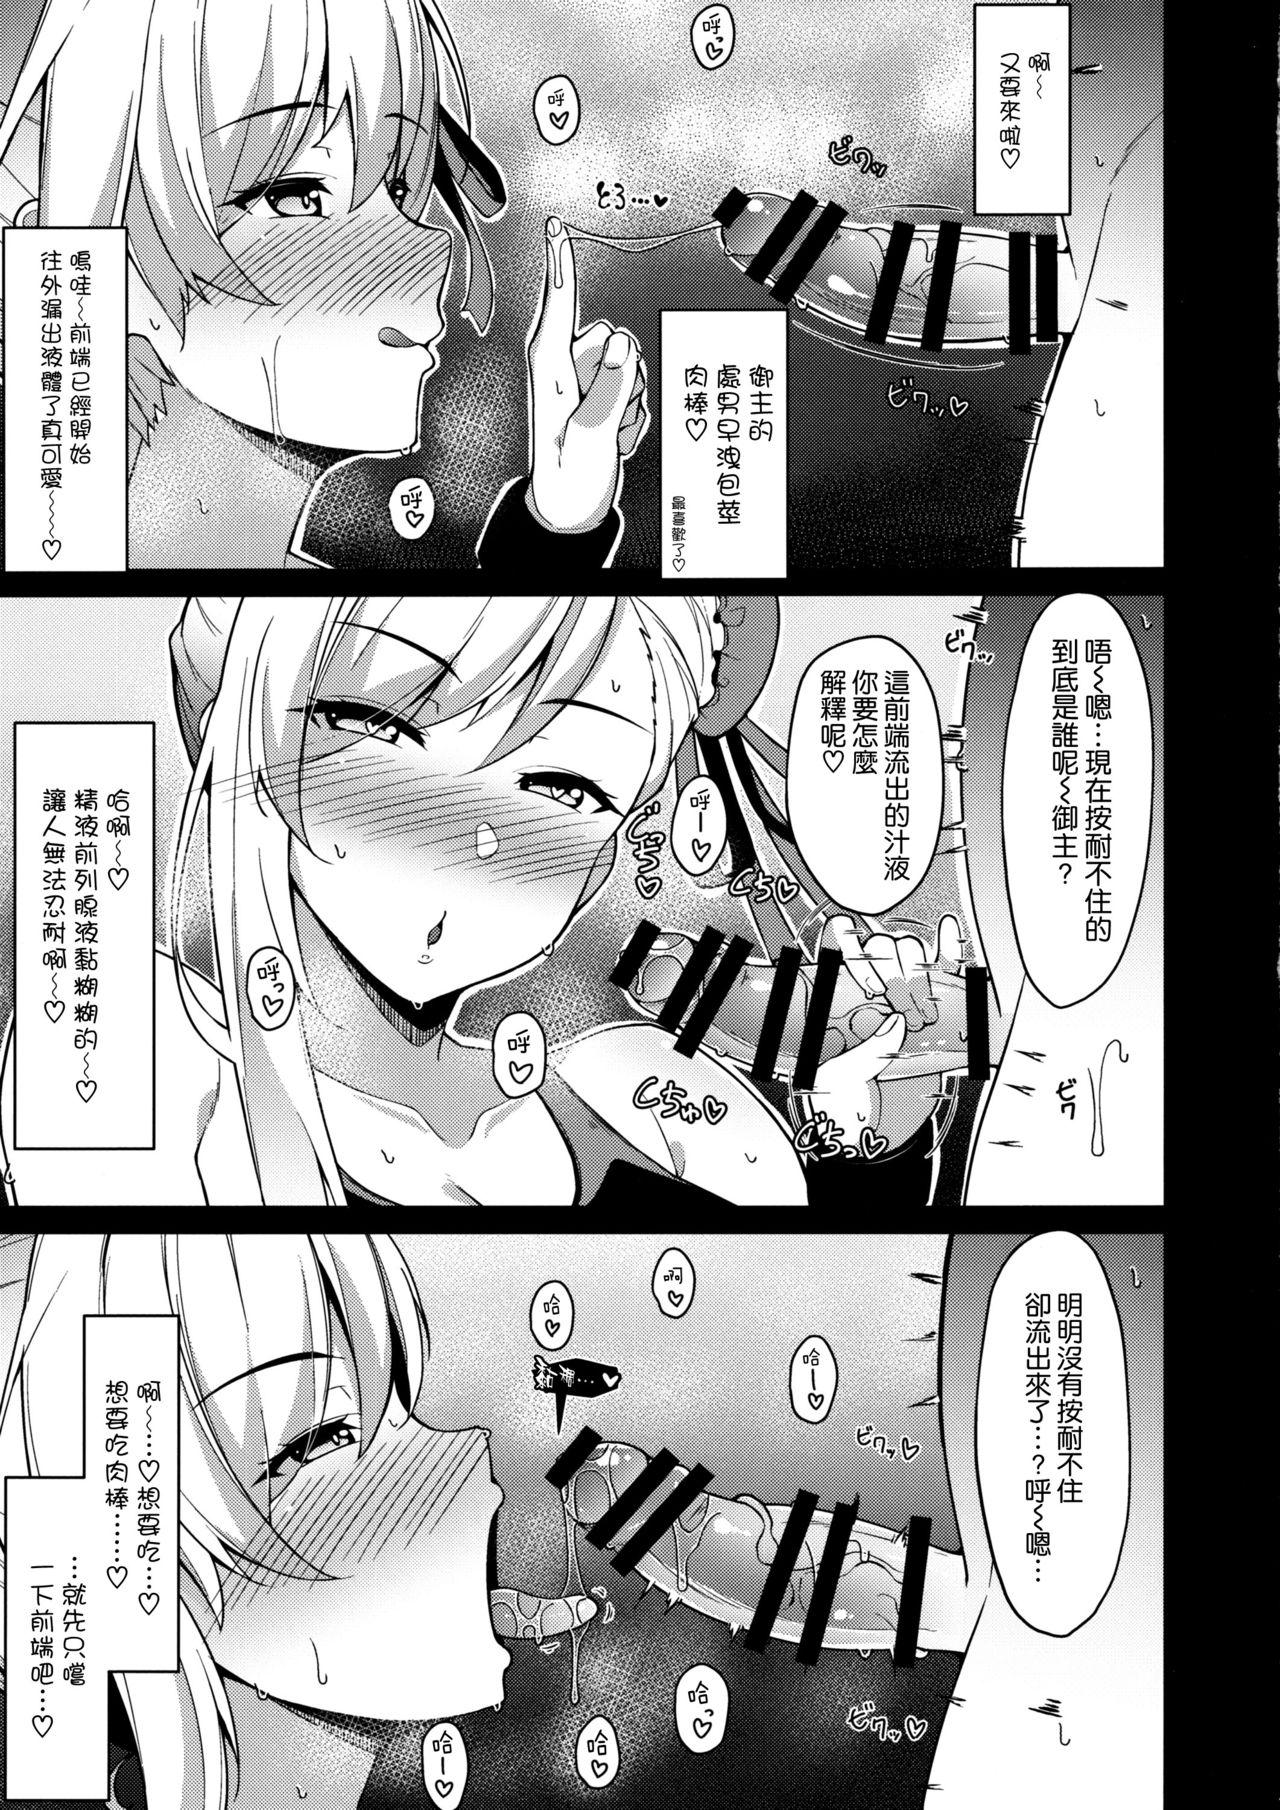 Hand Job (C97) [Cow Lipid (Fuurai)] U-D-N-S (Fate/Grand Order) [Chinese] [空気系☆漢化] - Fate grand order All Natural - Page 7